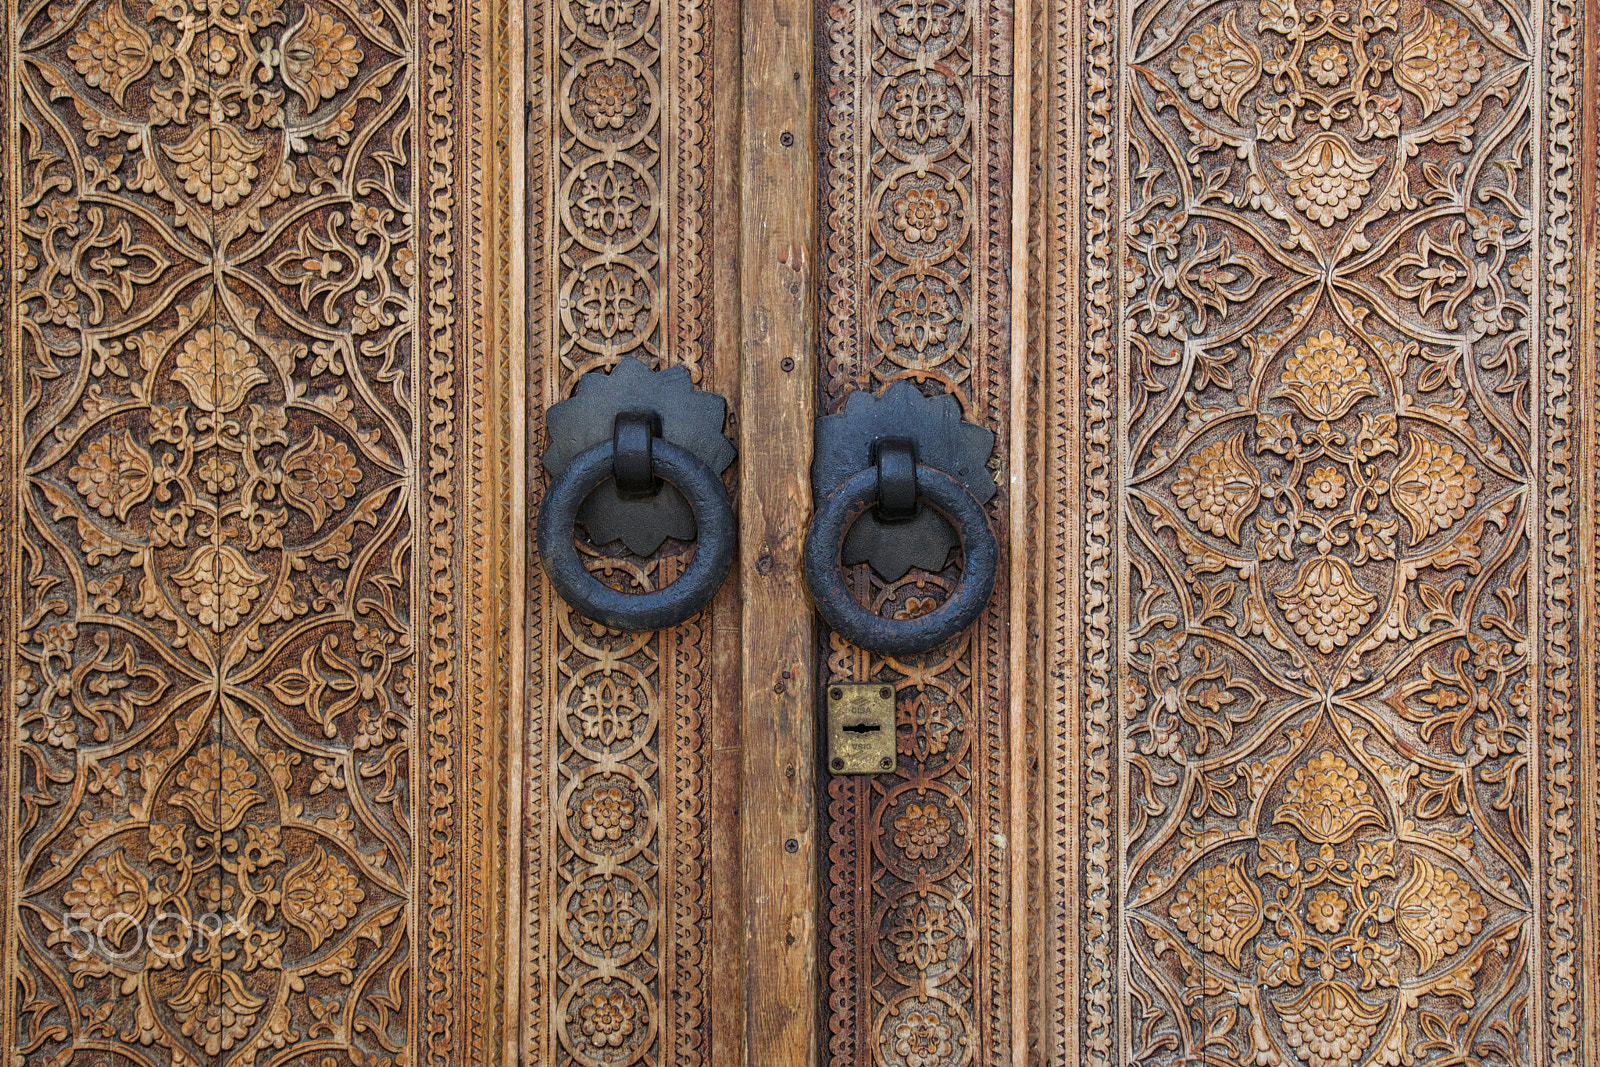 Sony a6000 sample photo. Wood patterns on the doors, wood texture photography